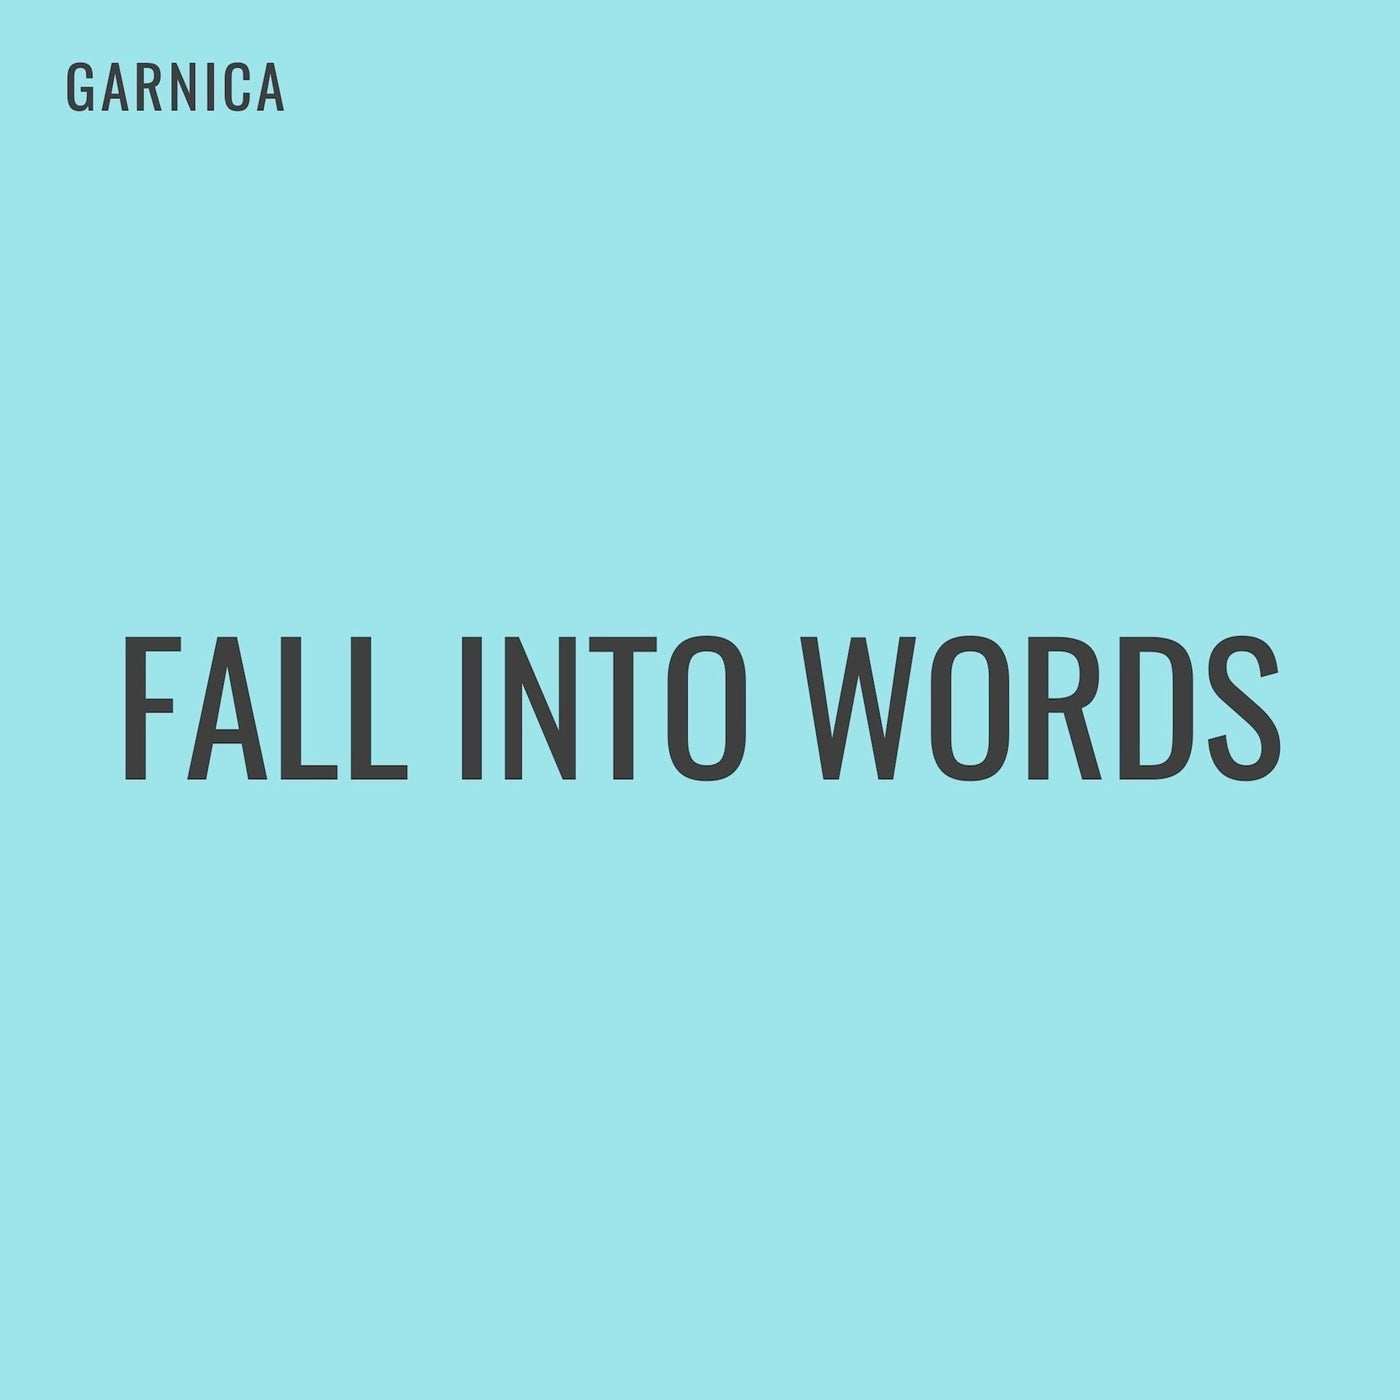 Fall Into Words